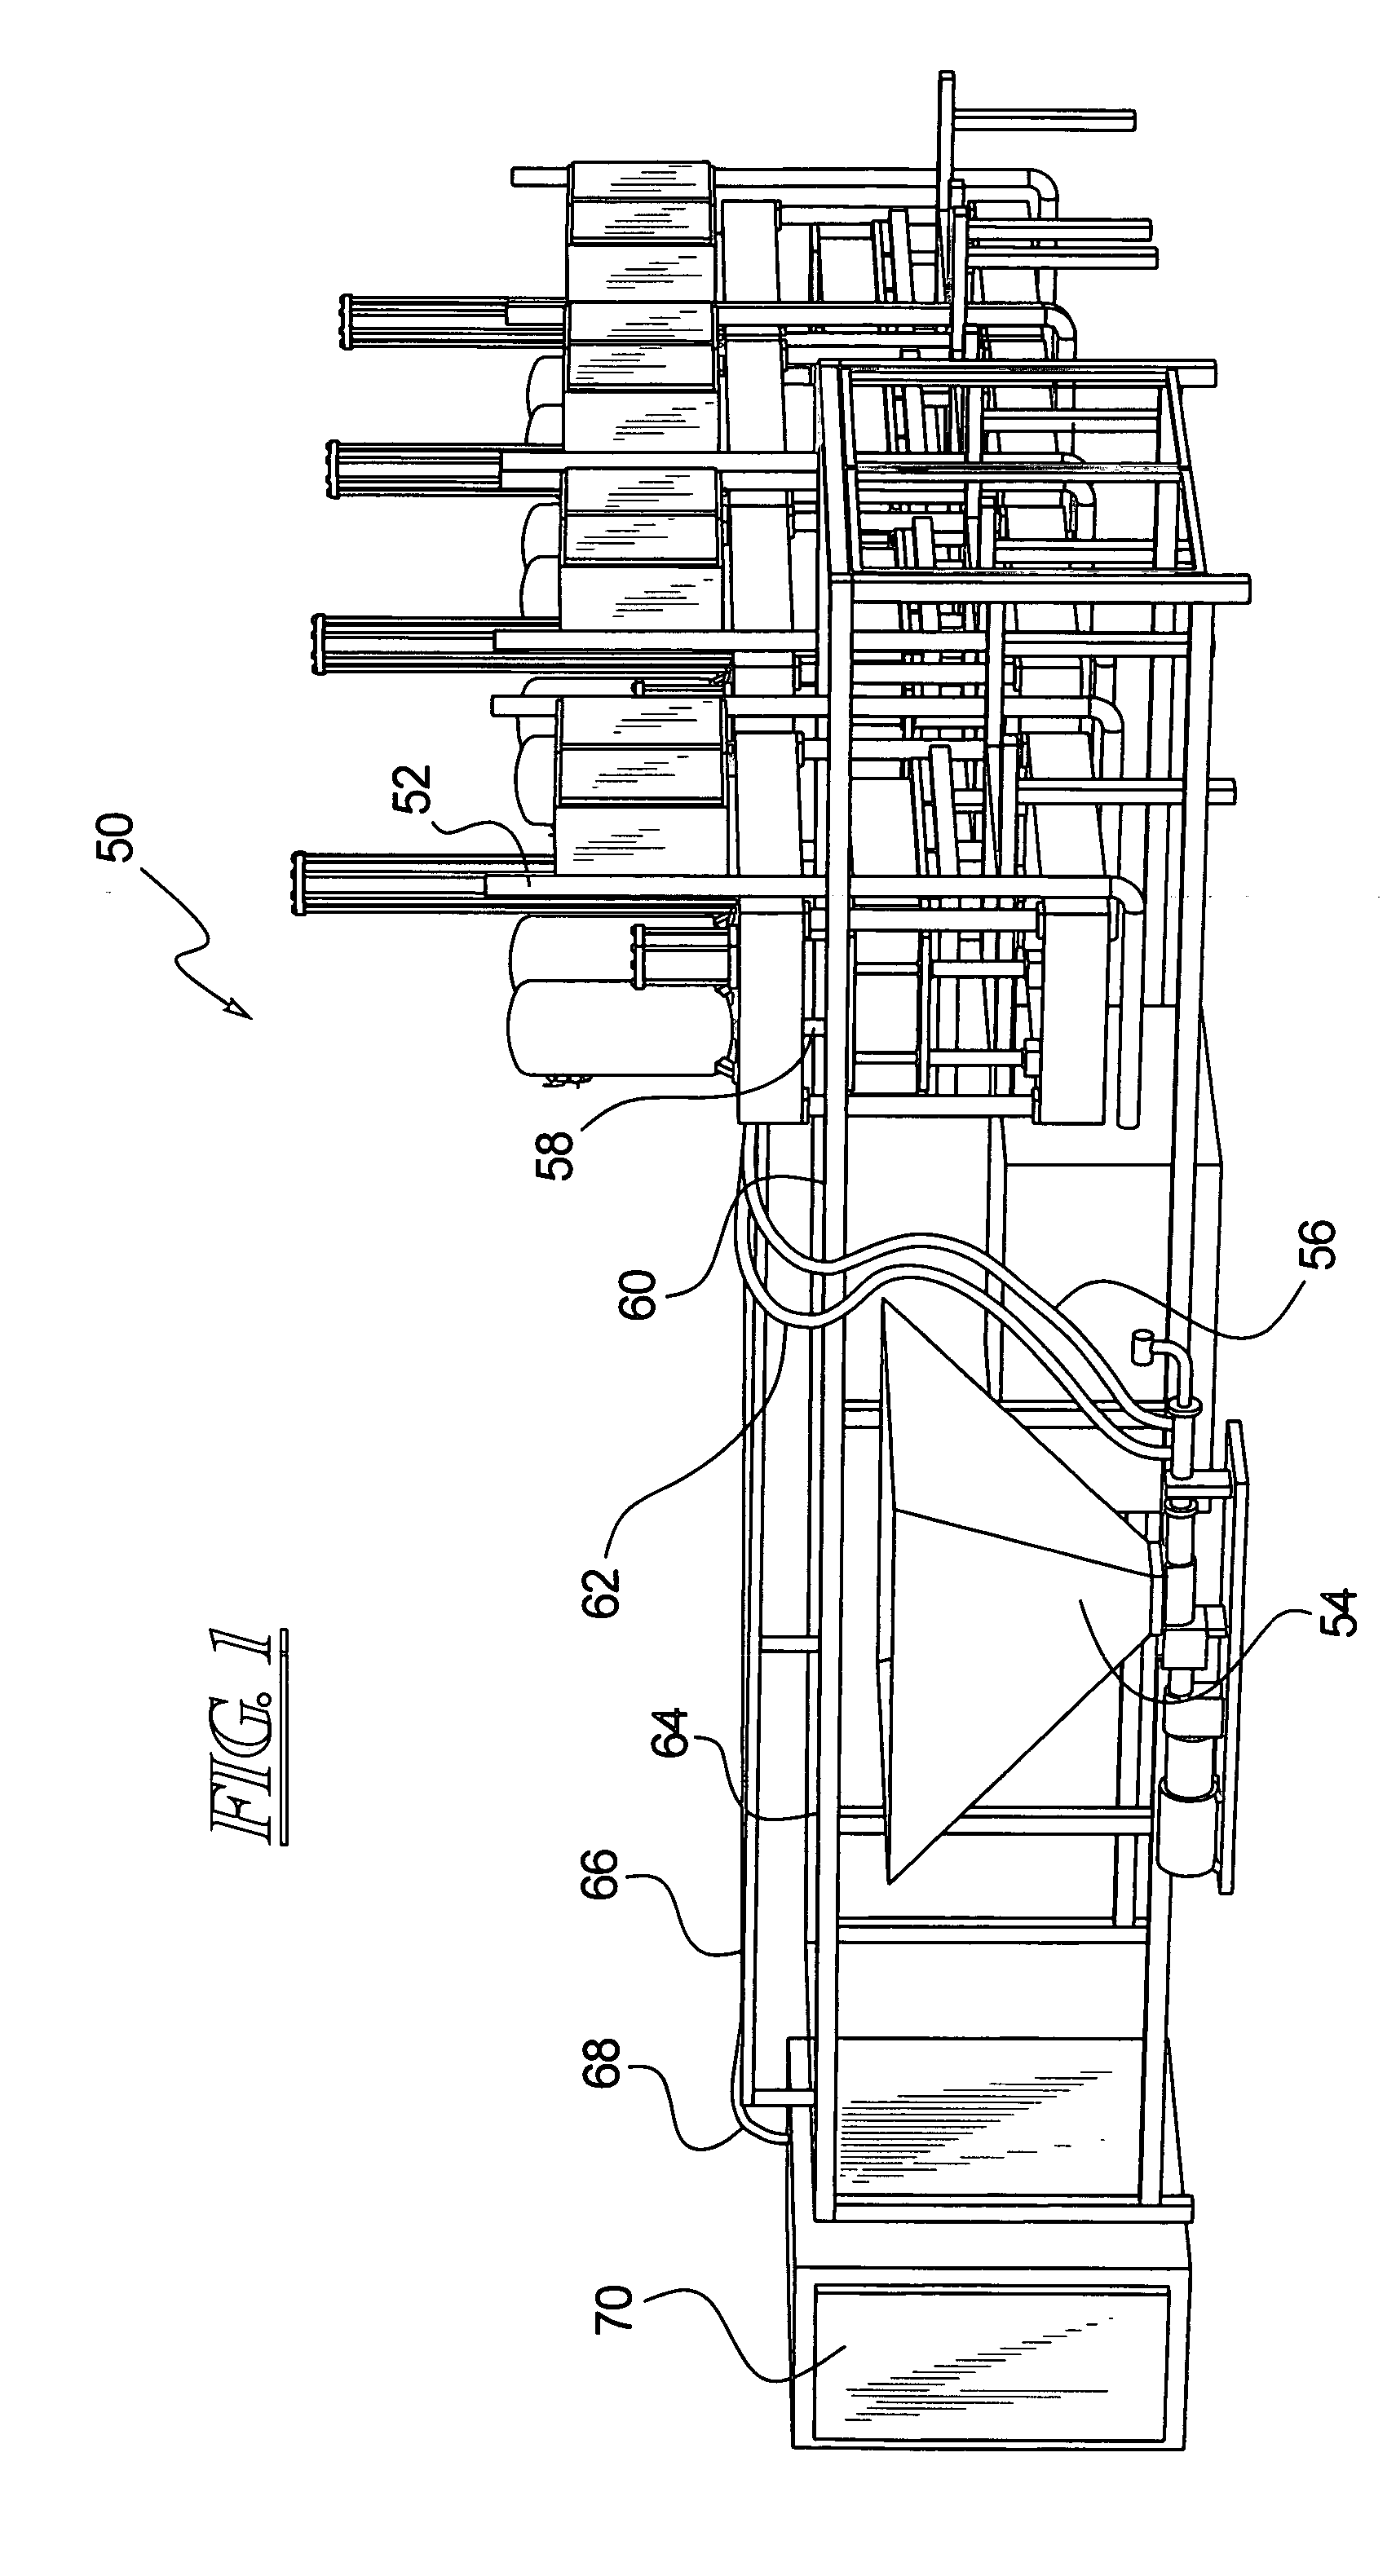 Apparatus for manufacturing biodegradable food service article and method